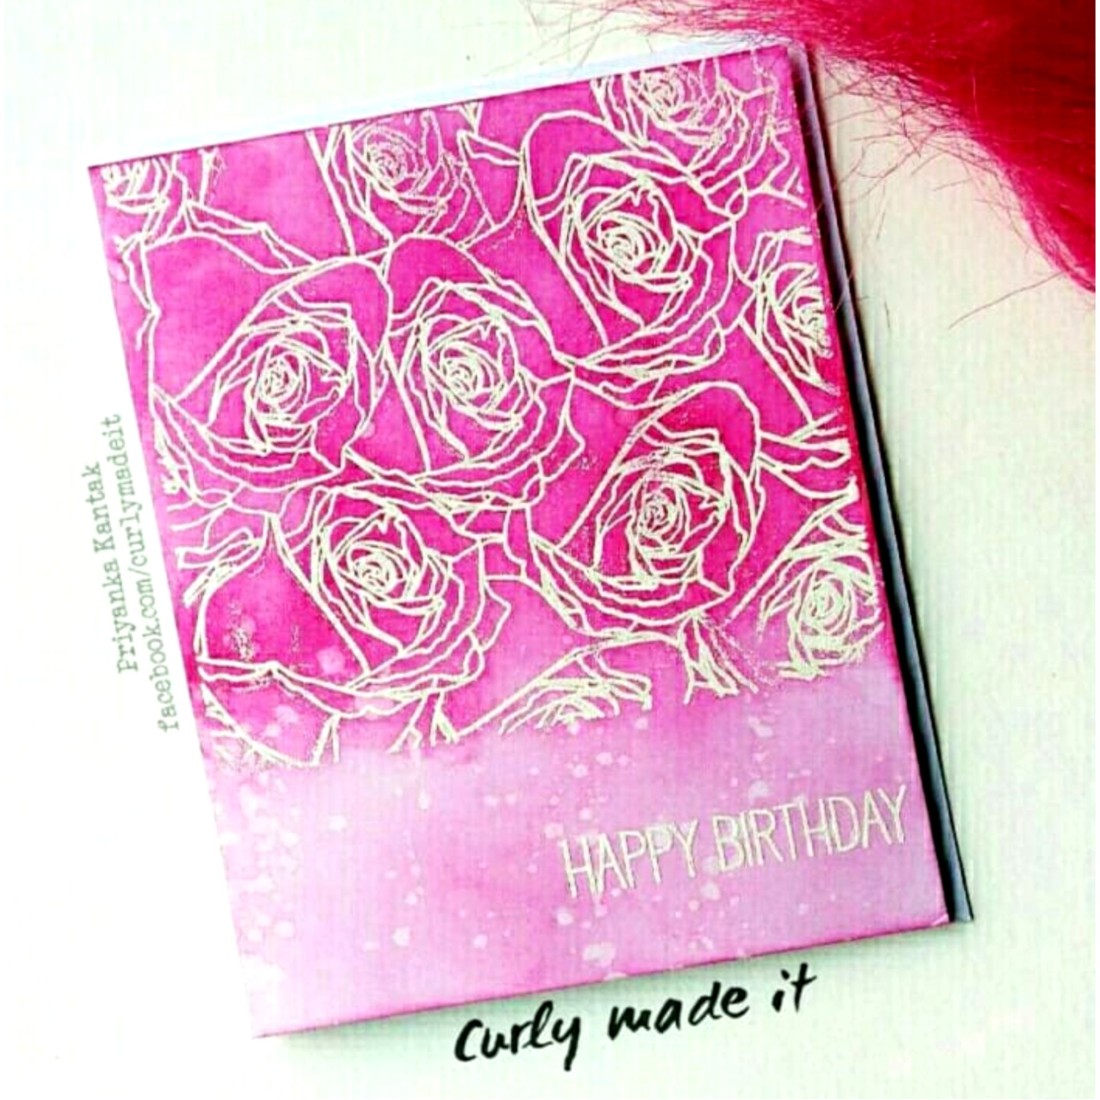 Craftyscrappers Stamps- SCATTERED ROSES BACKGROUND